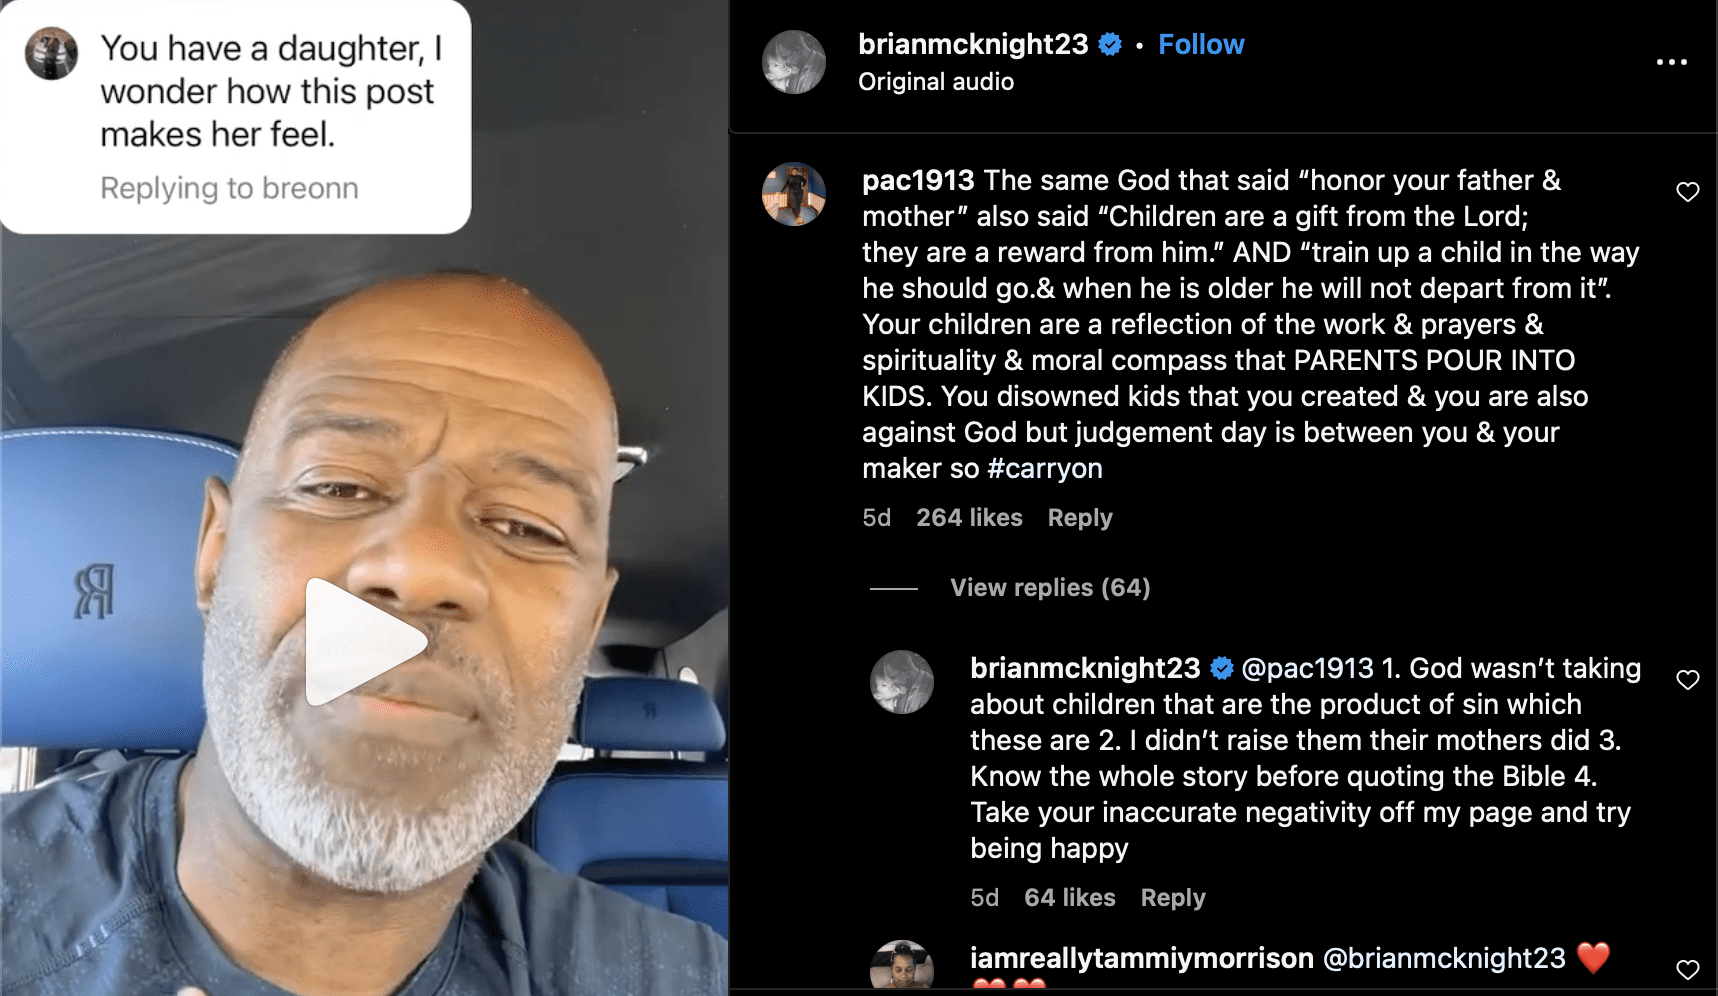 Paternally petty Brian McKnight continues dissing his biological children